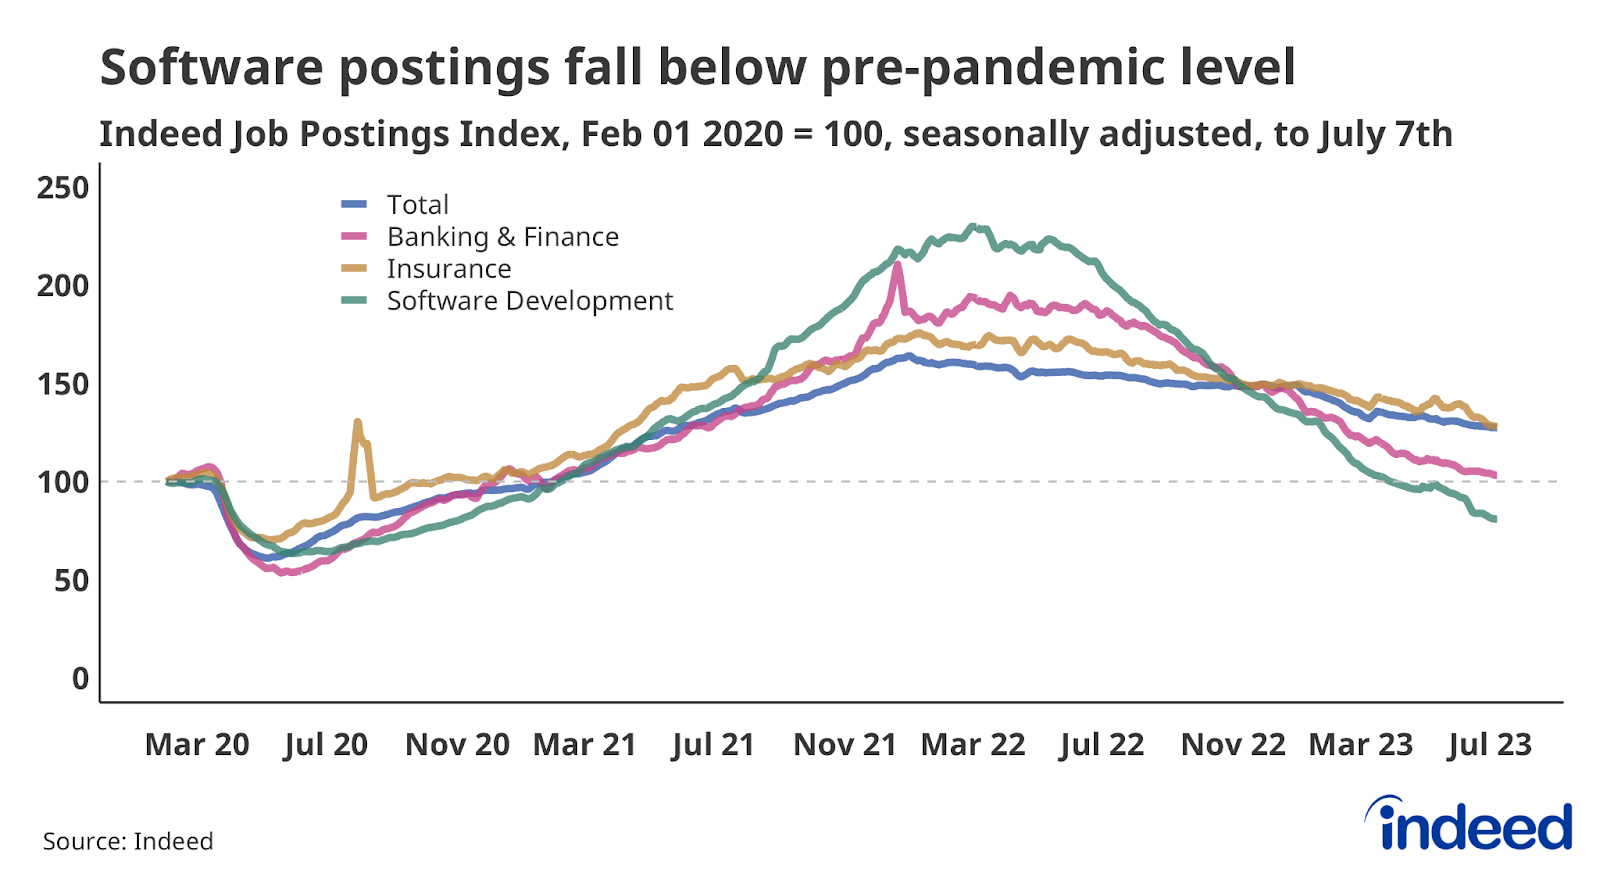 Line chart showing job postings in Banking & Finance, Insurance, and Software Development to July 7th, 2023. Software Development postings have fallen below their pre-pandemic level.